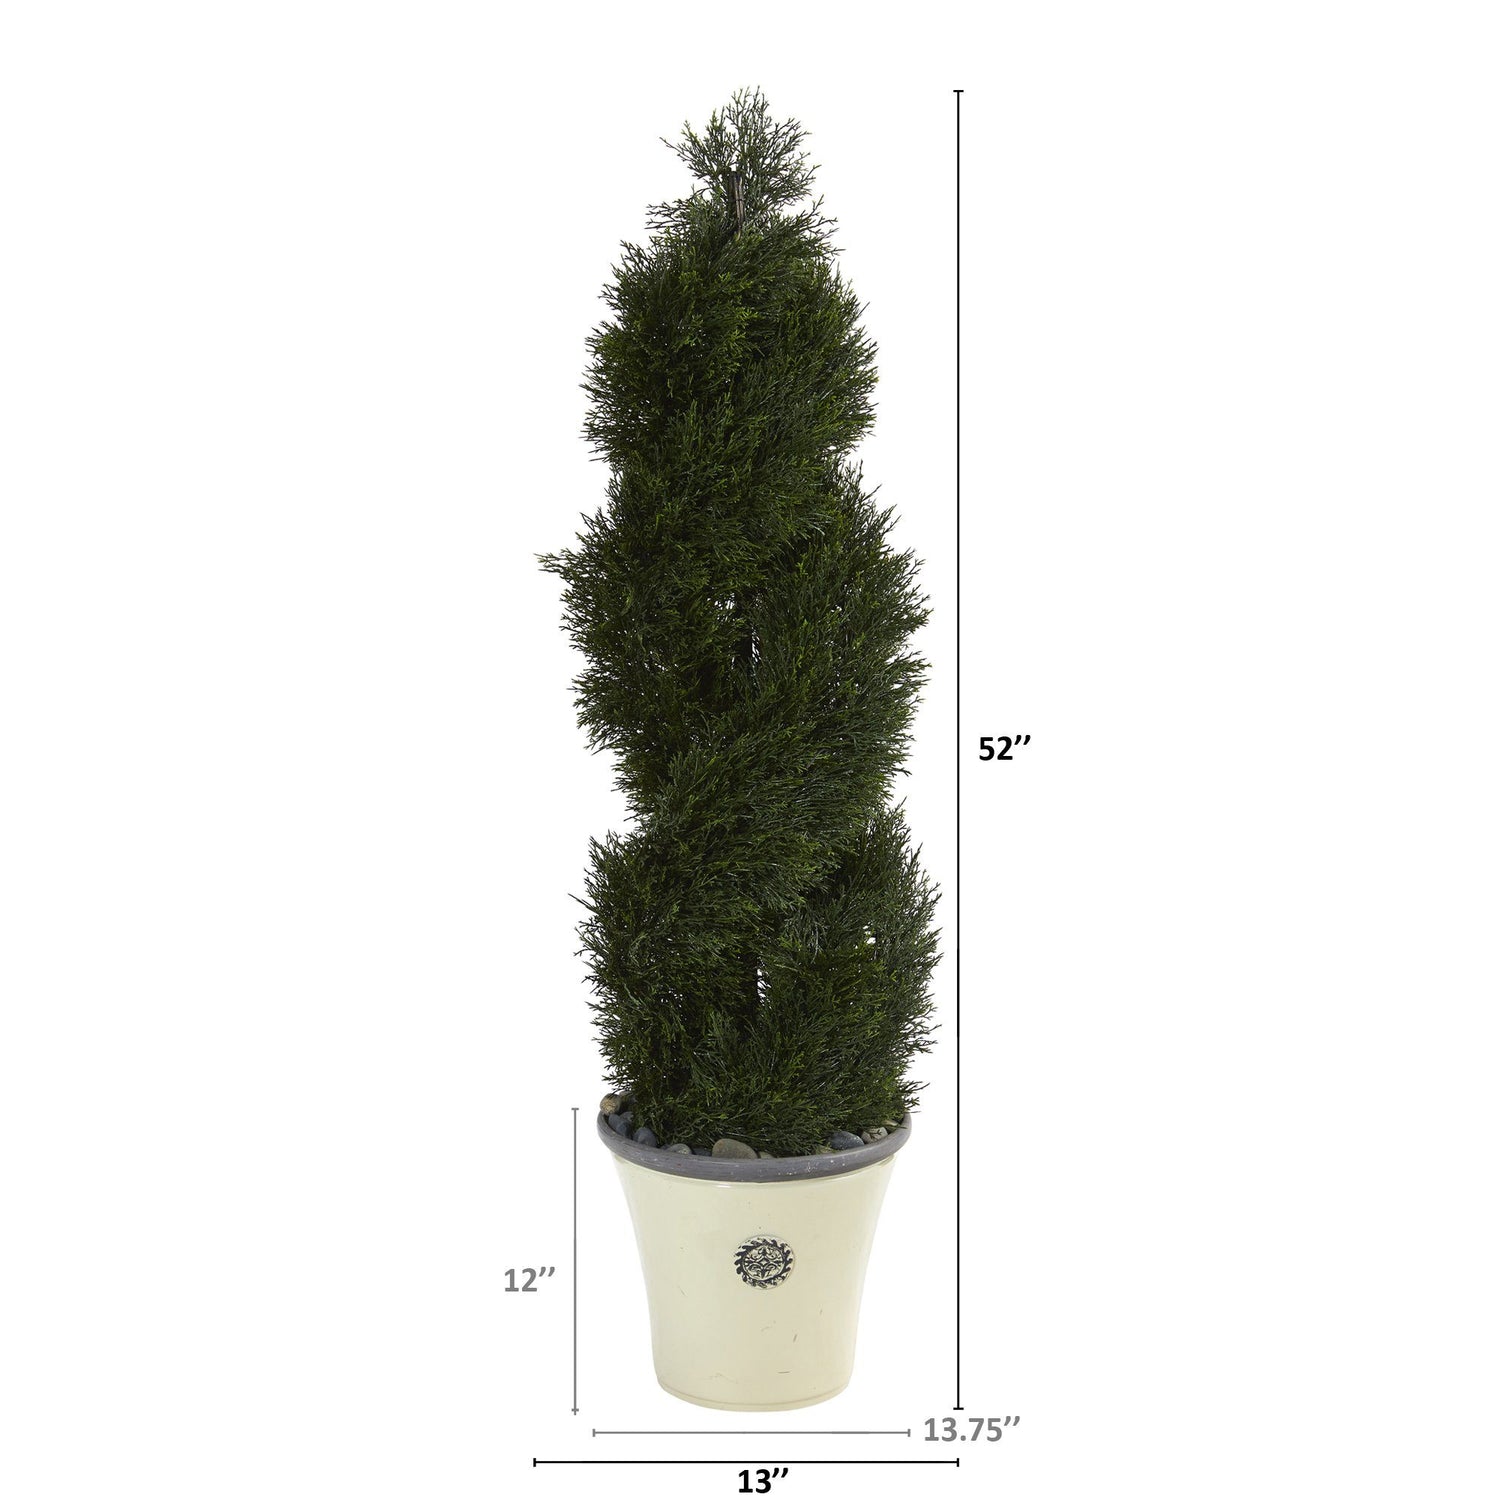 52” Double Pond Cypress Spiral Topiary Artificial Tree in Planter (Indoor/Outdoor)